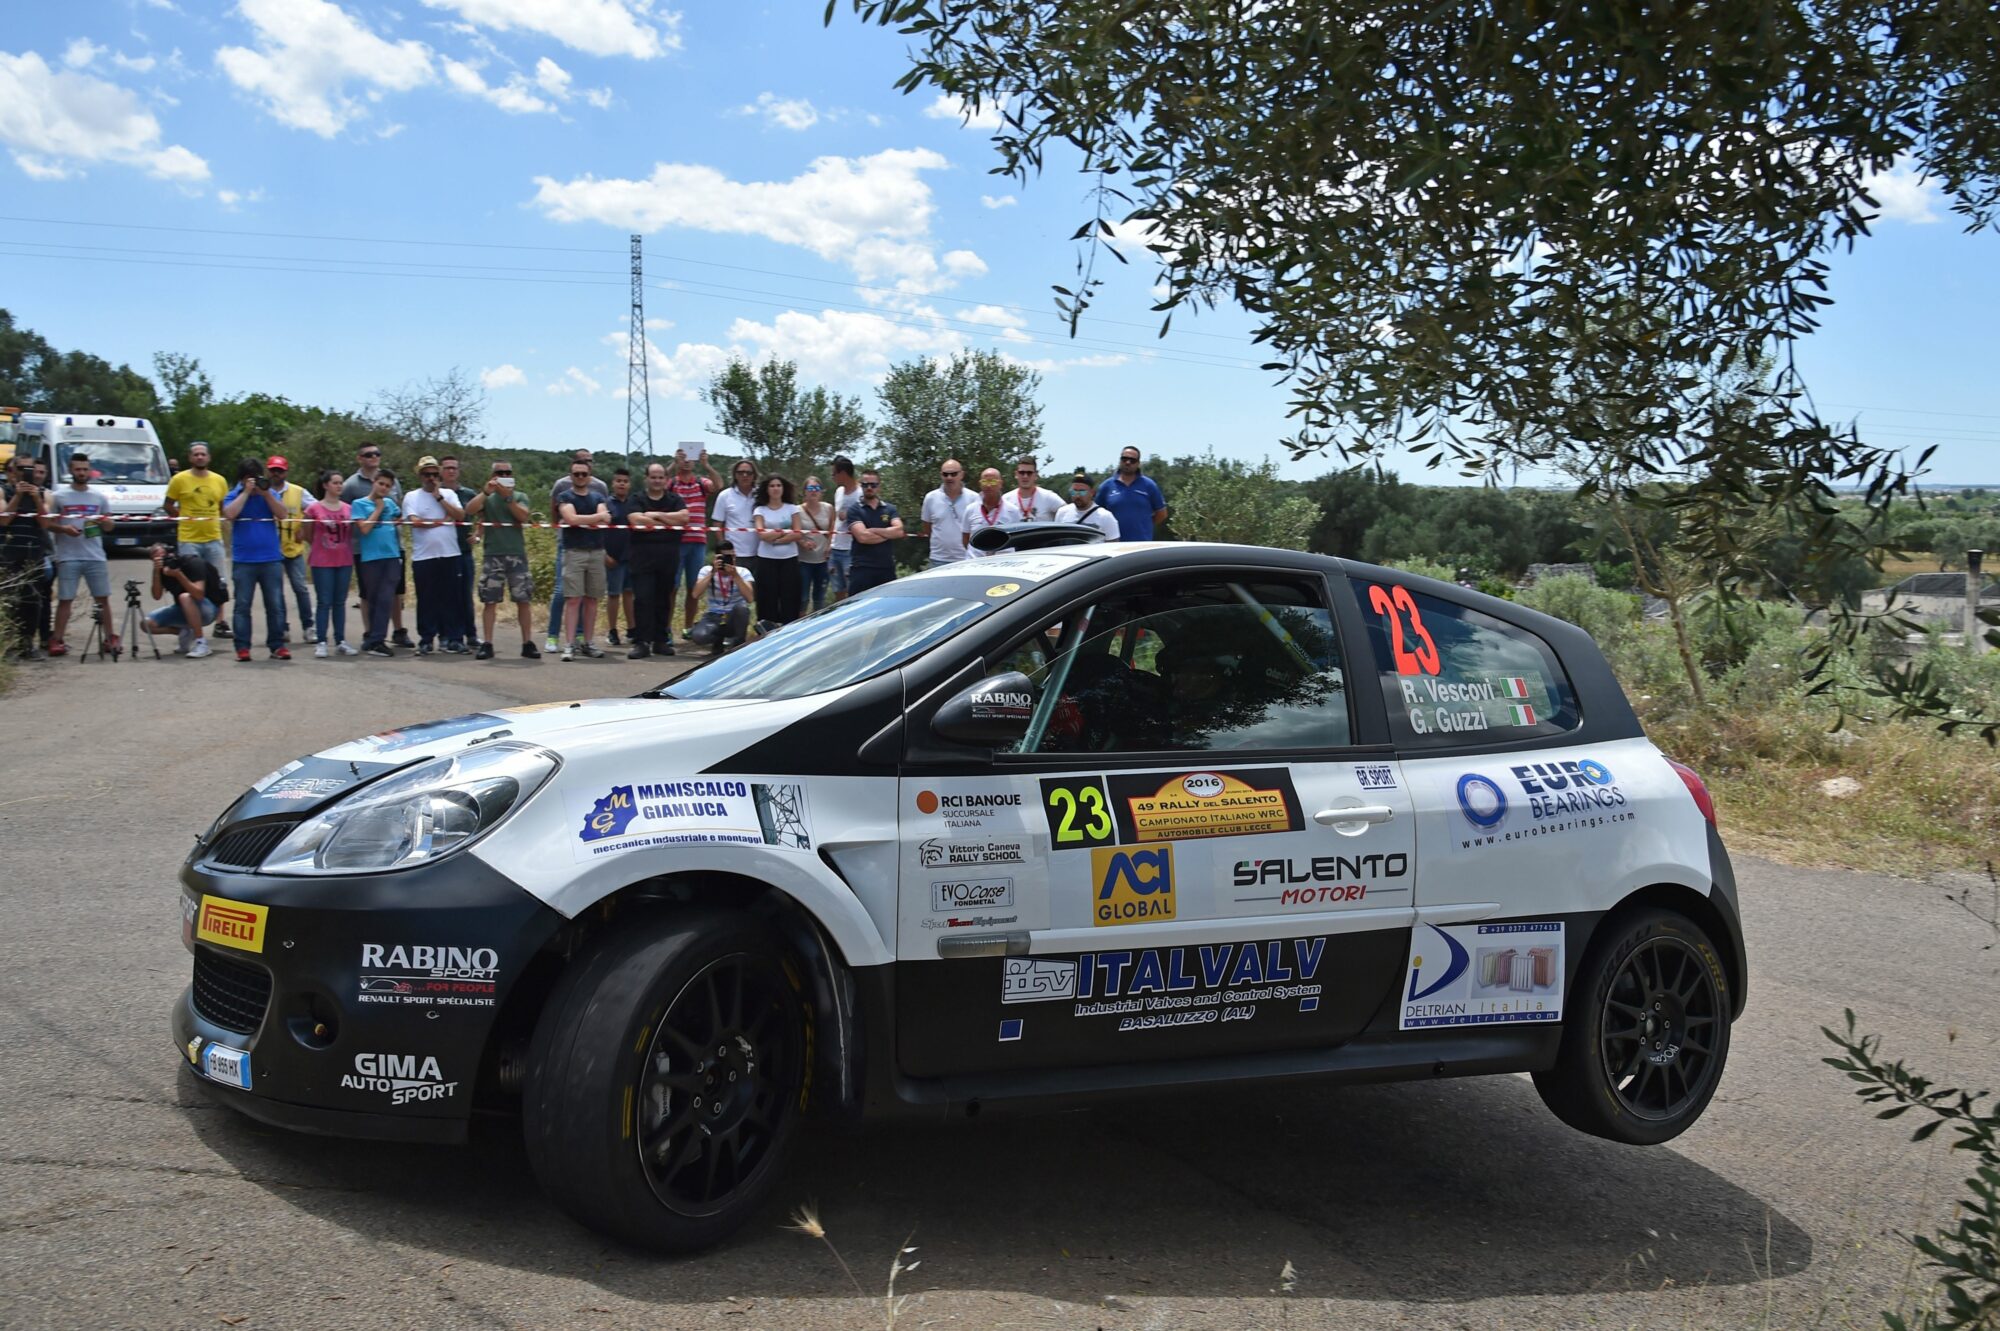 Primary Photo For: {79167, CS - WEEKEND DI SUCCESSI NEI RALLY PER RENAULT}..jpeg